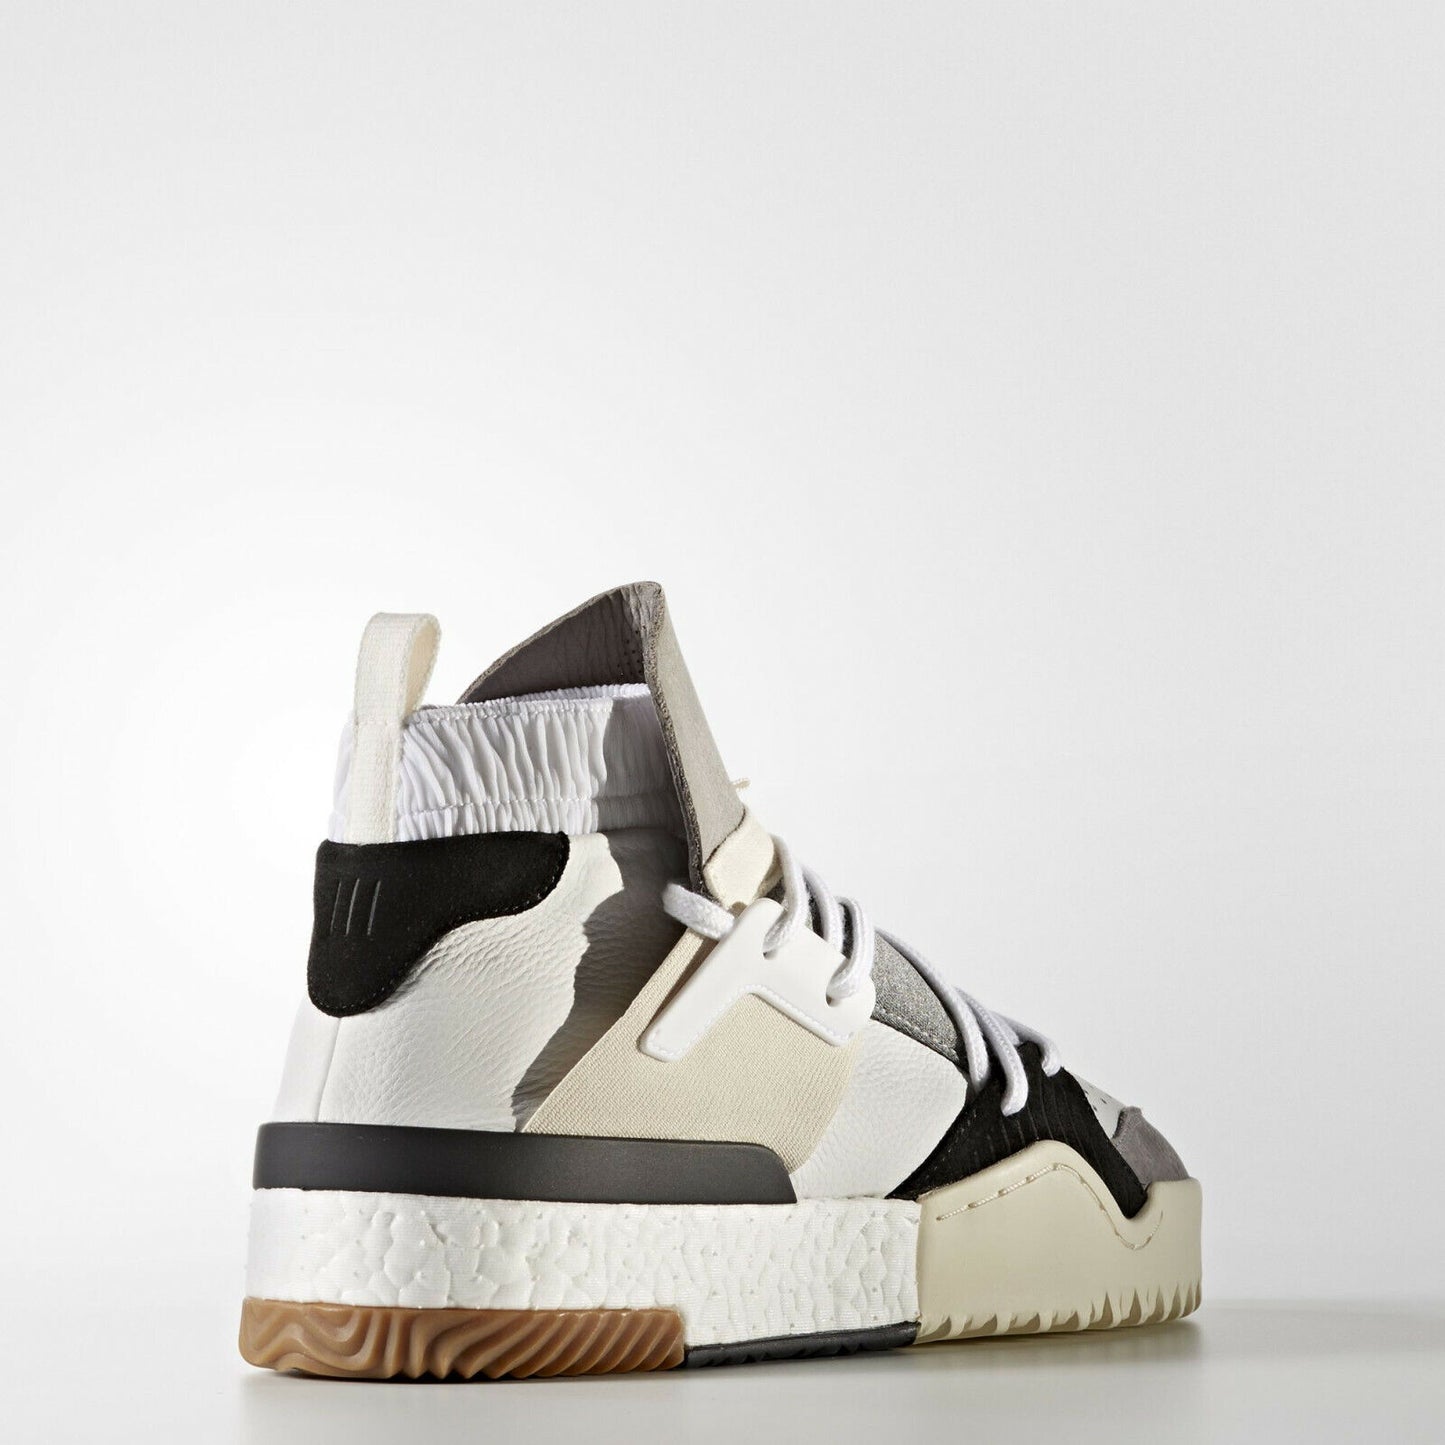 adidas X Alexander Wang BBALL Boost Leather White CM7824 SIZES 4 5 5.5 6 6.5 7